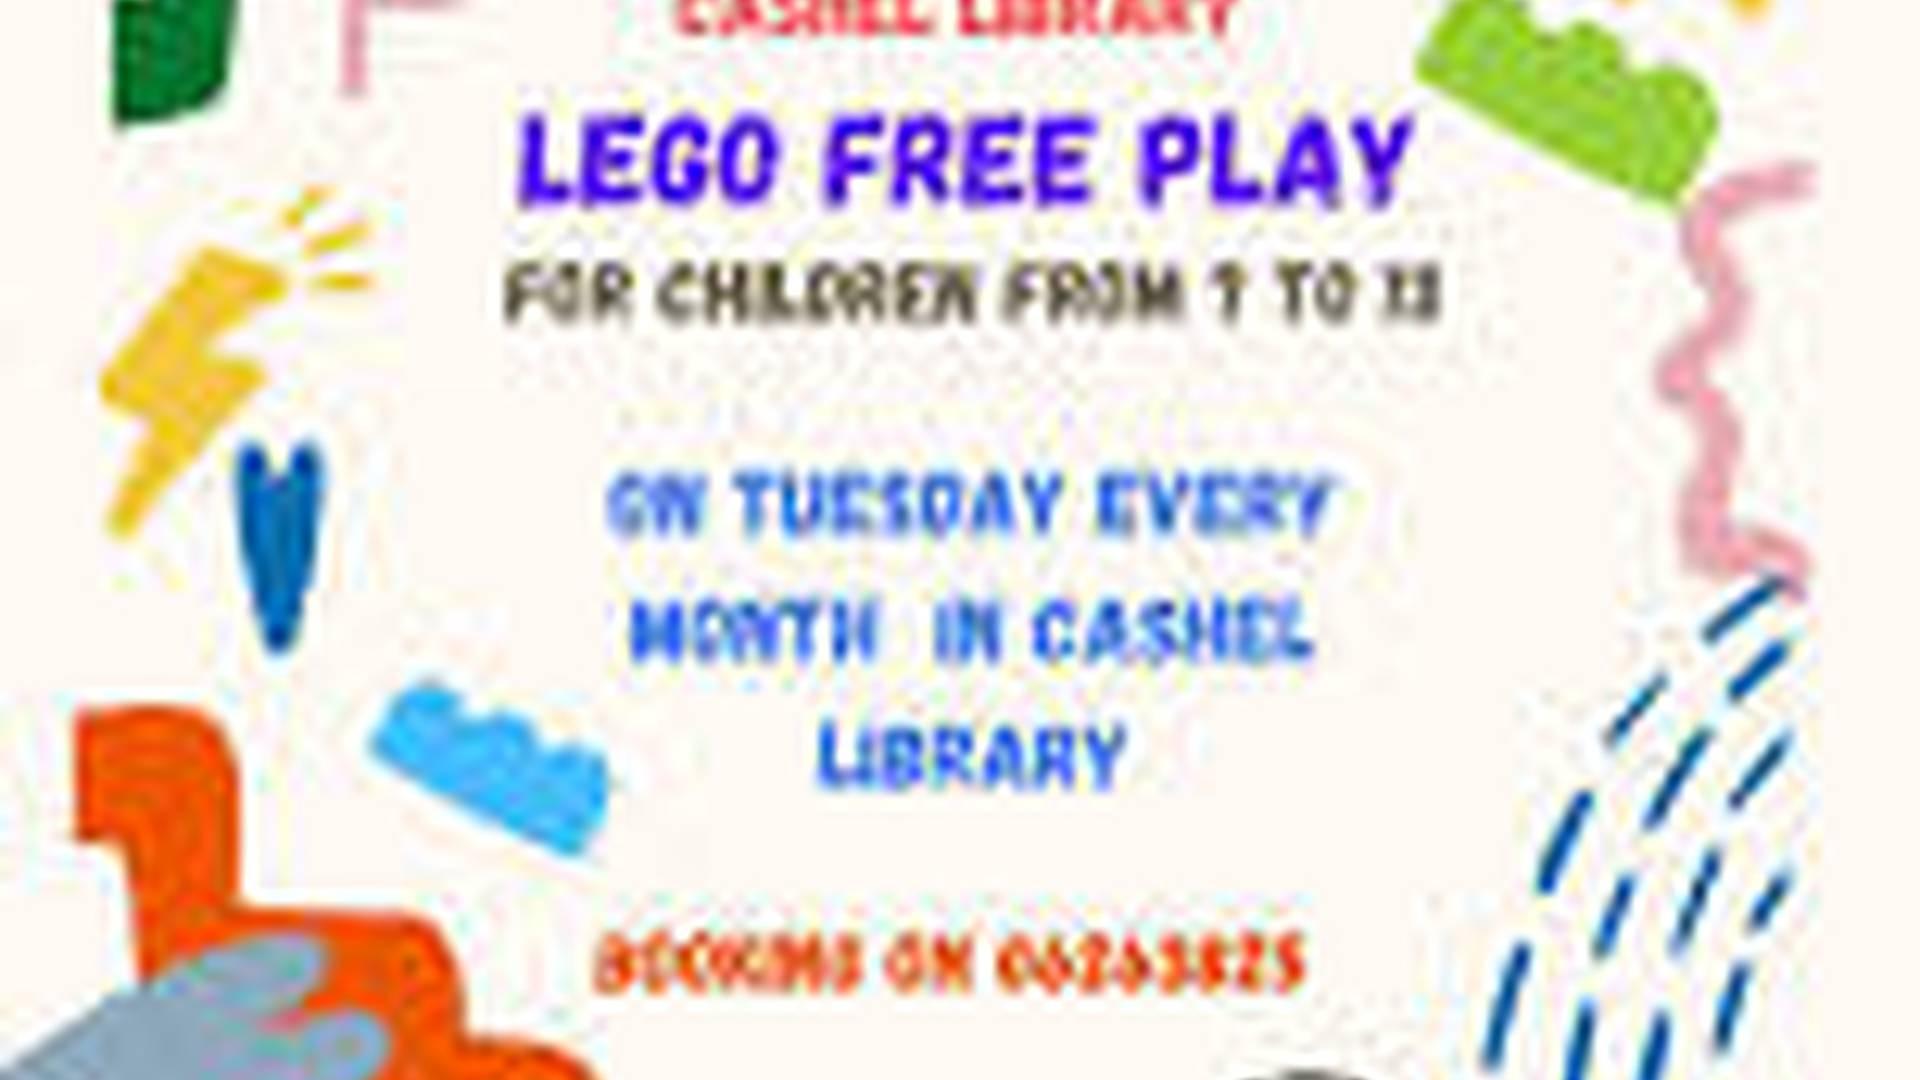 Cashel Library Lego Free Play for children photo